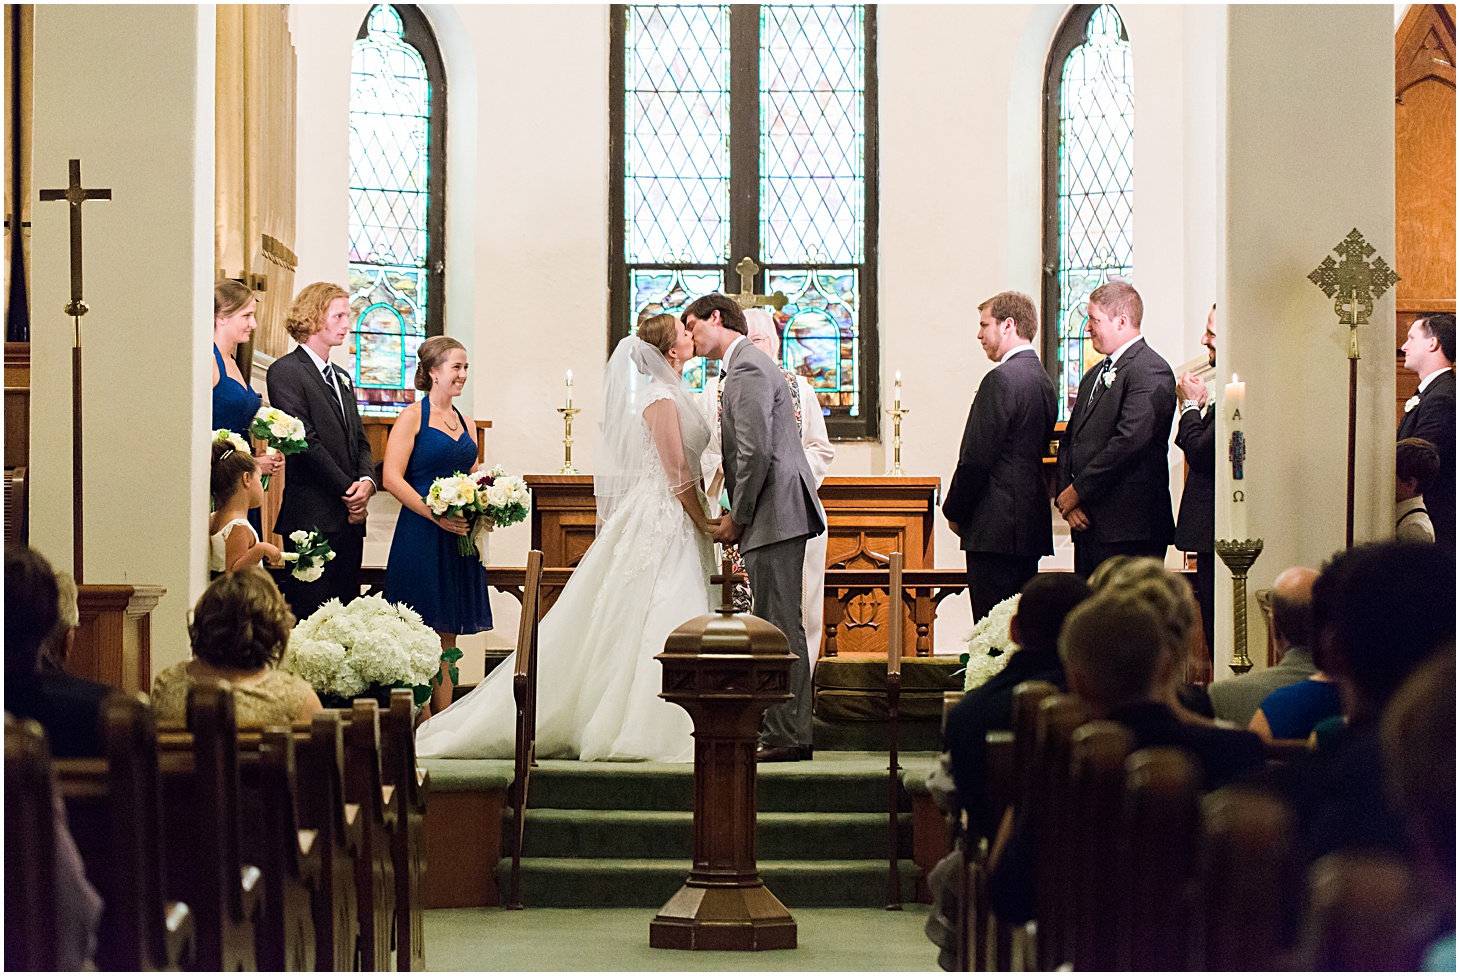 Georgetown Lutheran Church | Vintage-Inspired Dumbarton House Wedding in Georgetown by Sarah Bradshaw Photography